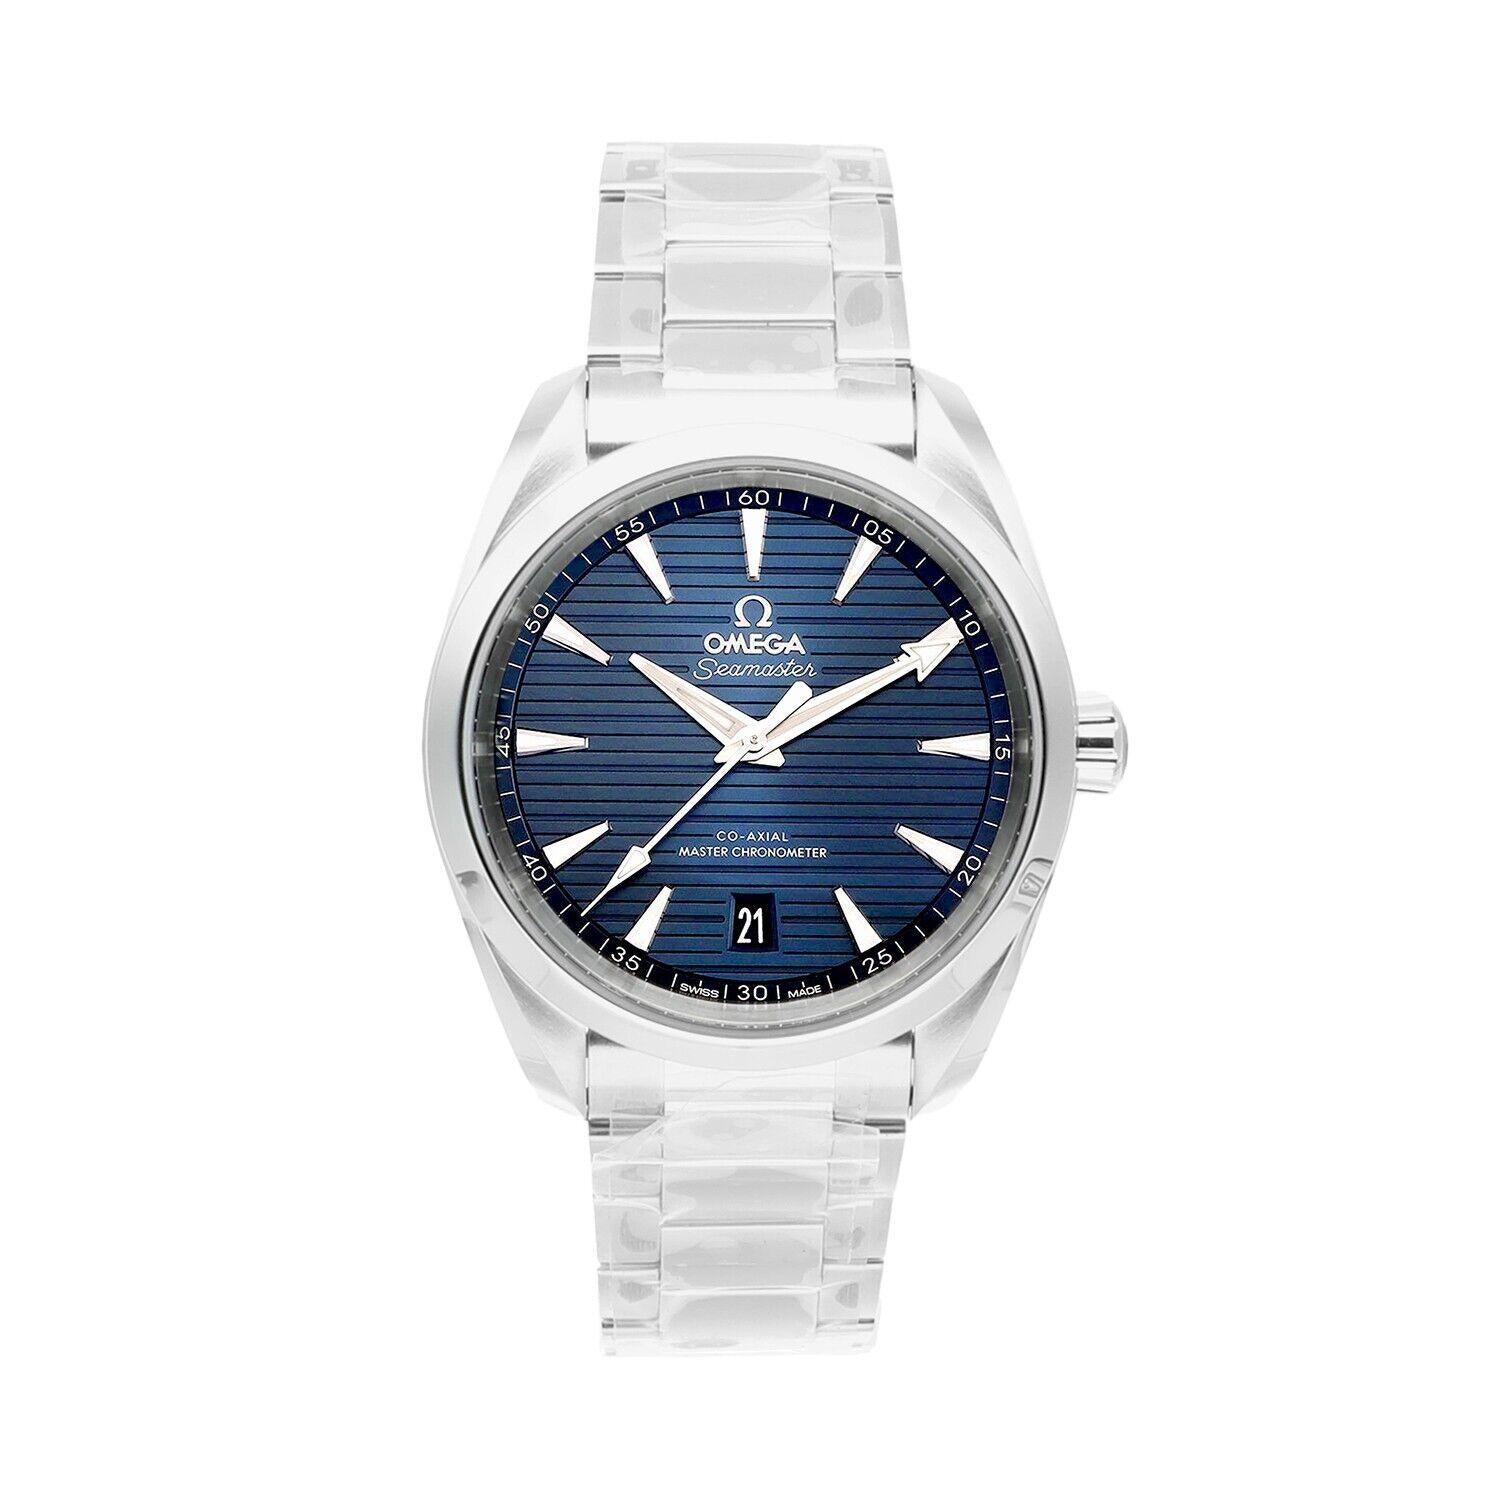 The Seamaster Aqua Terra is a superb tribute to OMEGA’s rich maritime heritage. In this 38mm model, the symmetrical case has been crafted from stainless steel, with a wave-edged design featured on the back.
The blue dial is sun-brushed and is